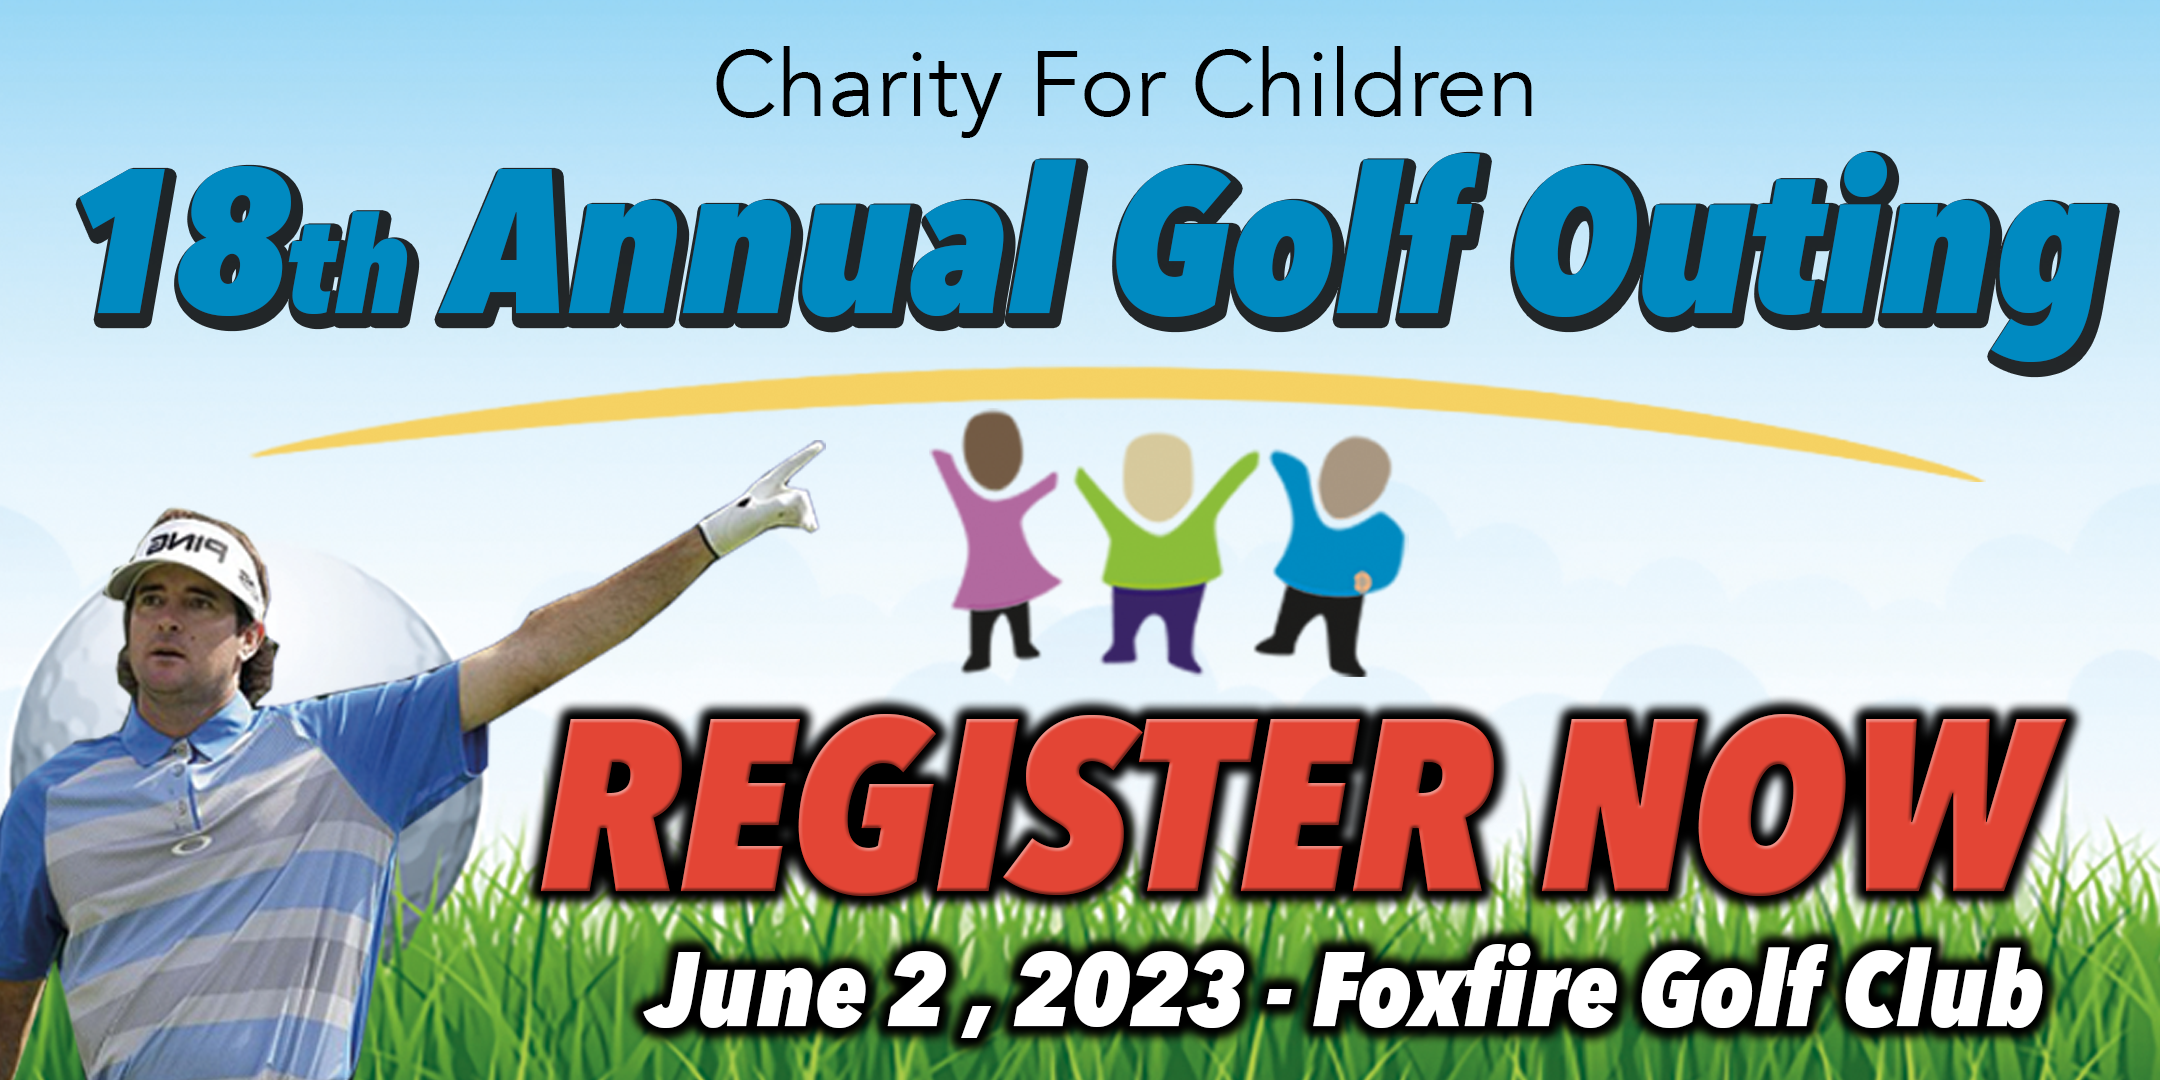 Charity For Children 18th Annual Golf Outing